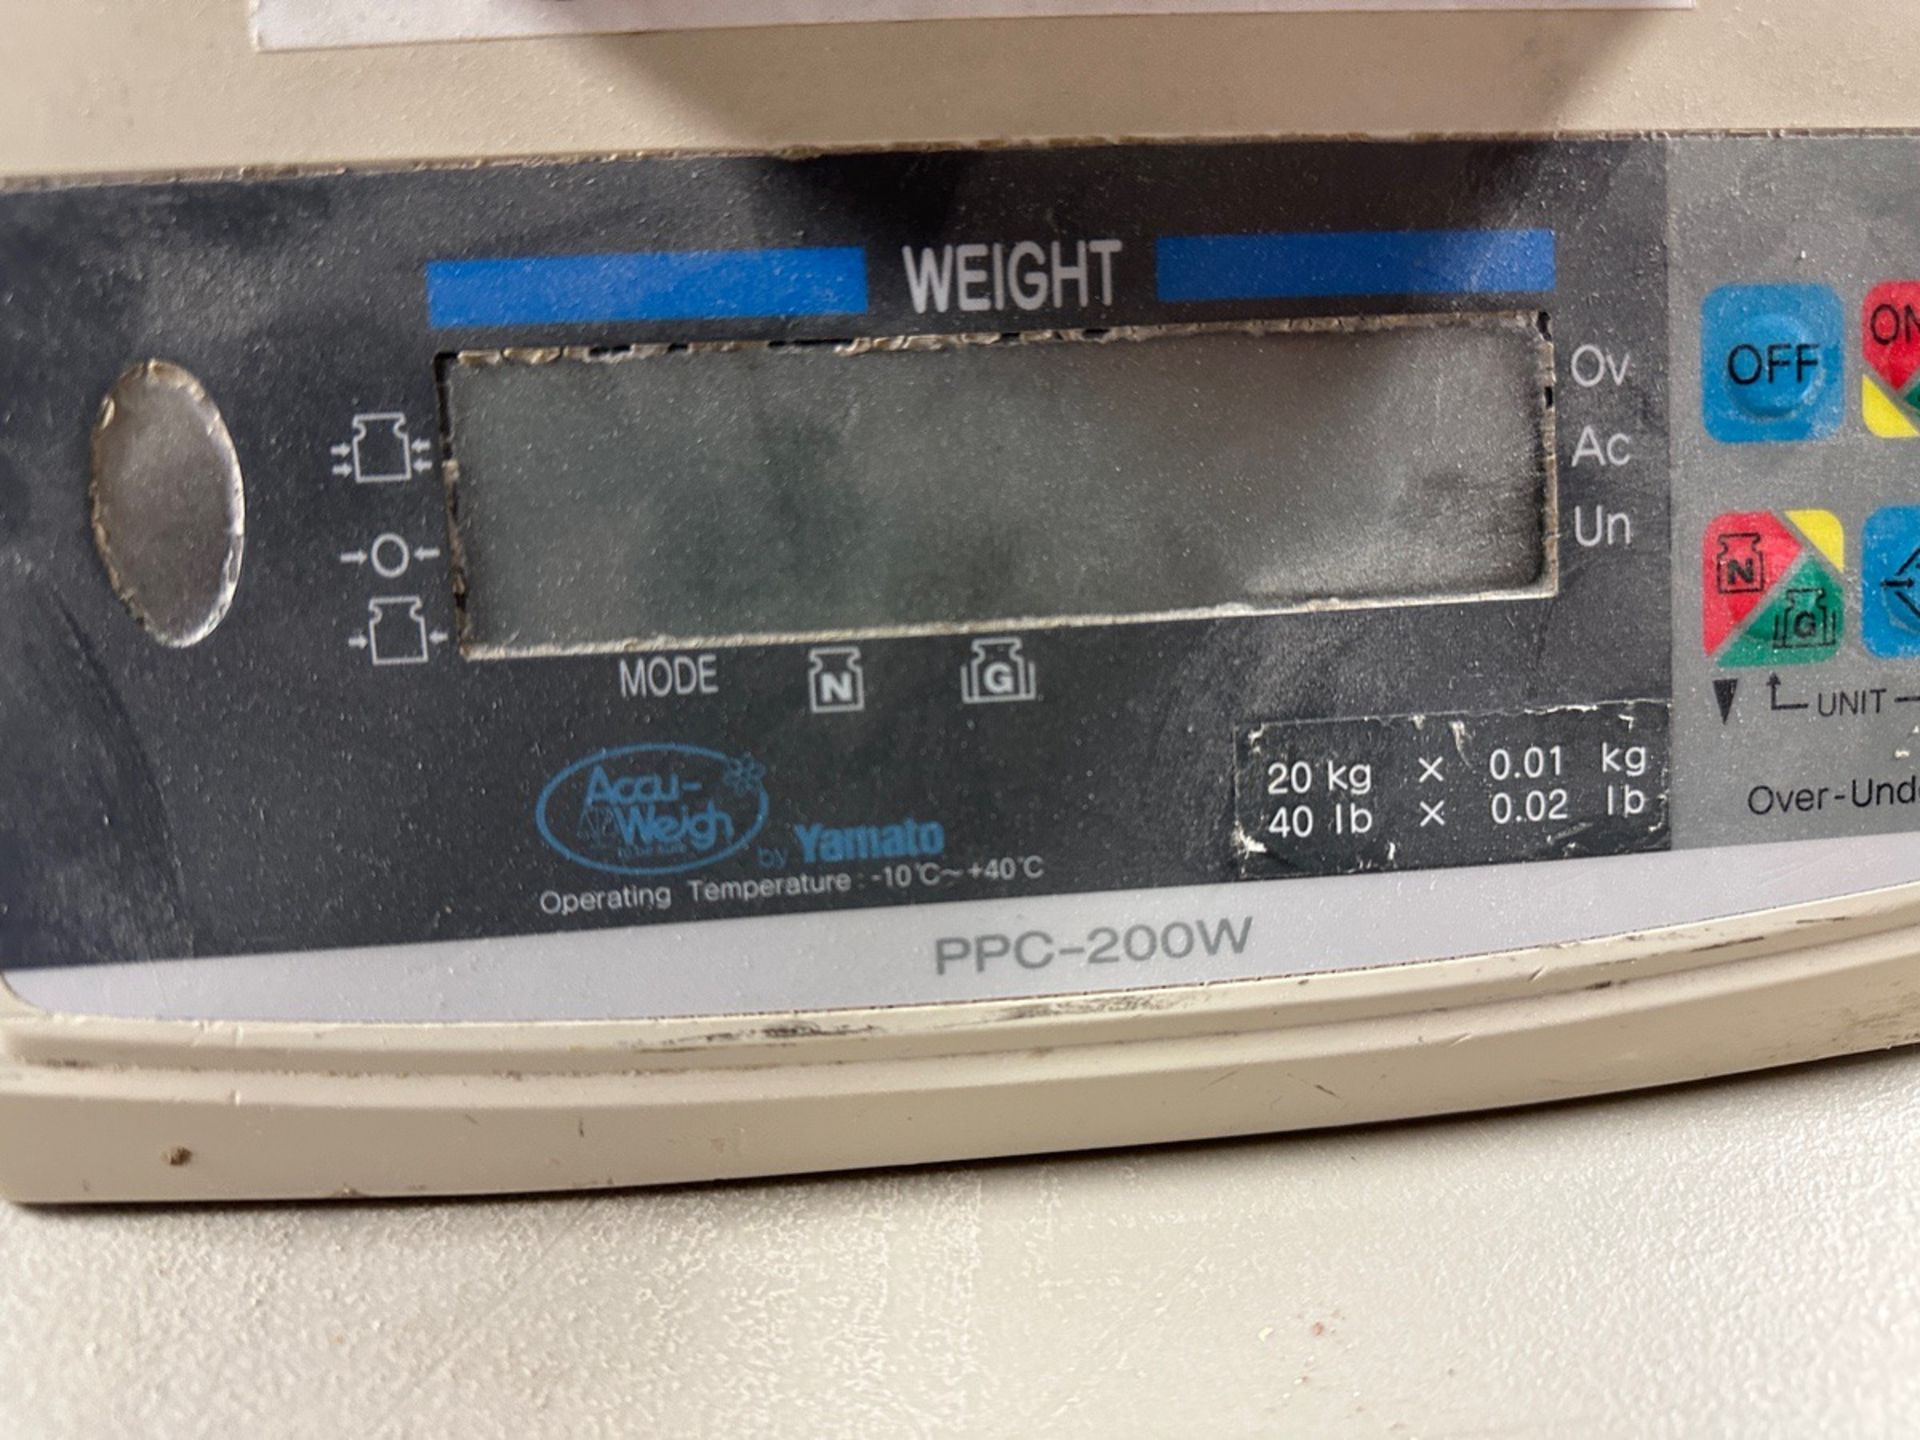 Yamato Model PPC-200W Digital Scale with 40 LB Capacity - Image 2 of 3